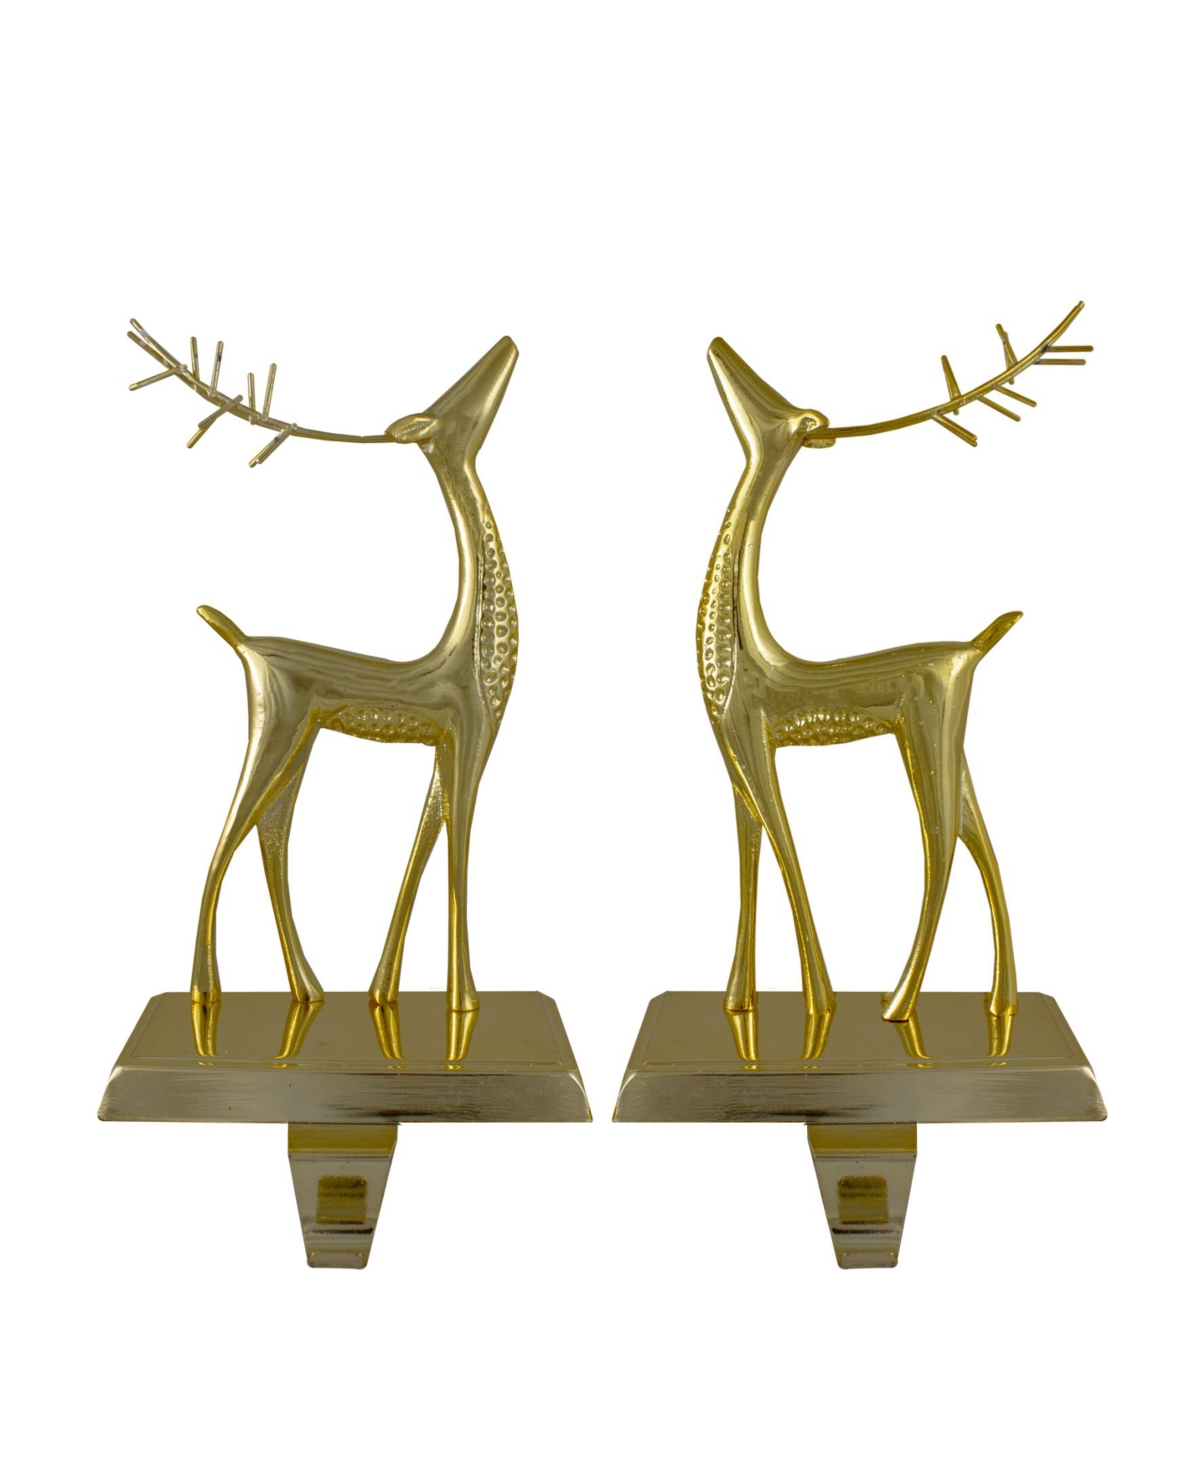 Northlight 9.75" Standing Reindeer Christmas Stocking Holders, Set Of 2 In Gold-tone